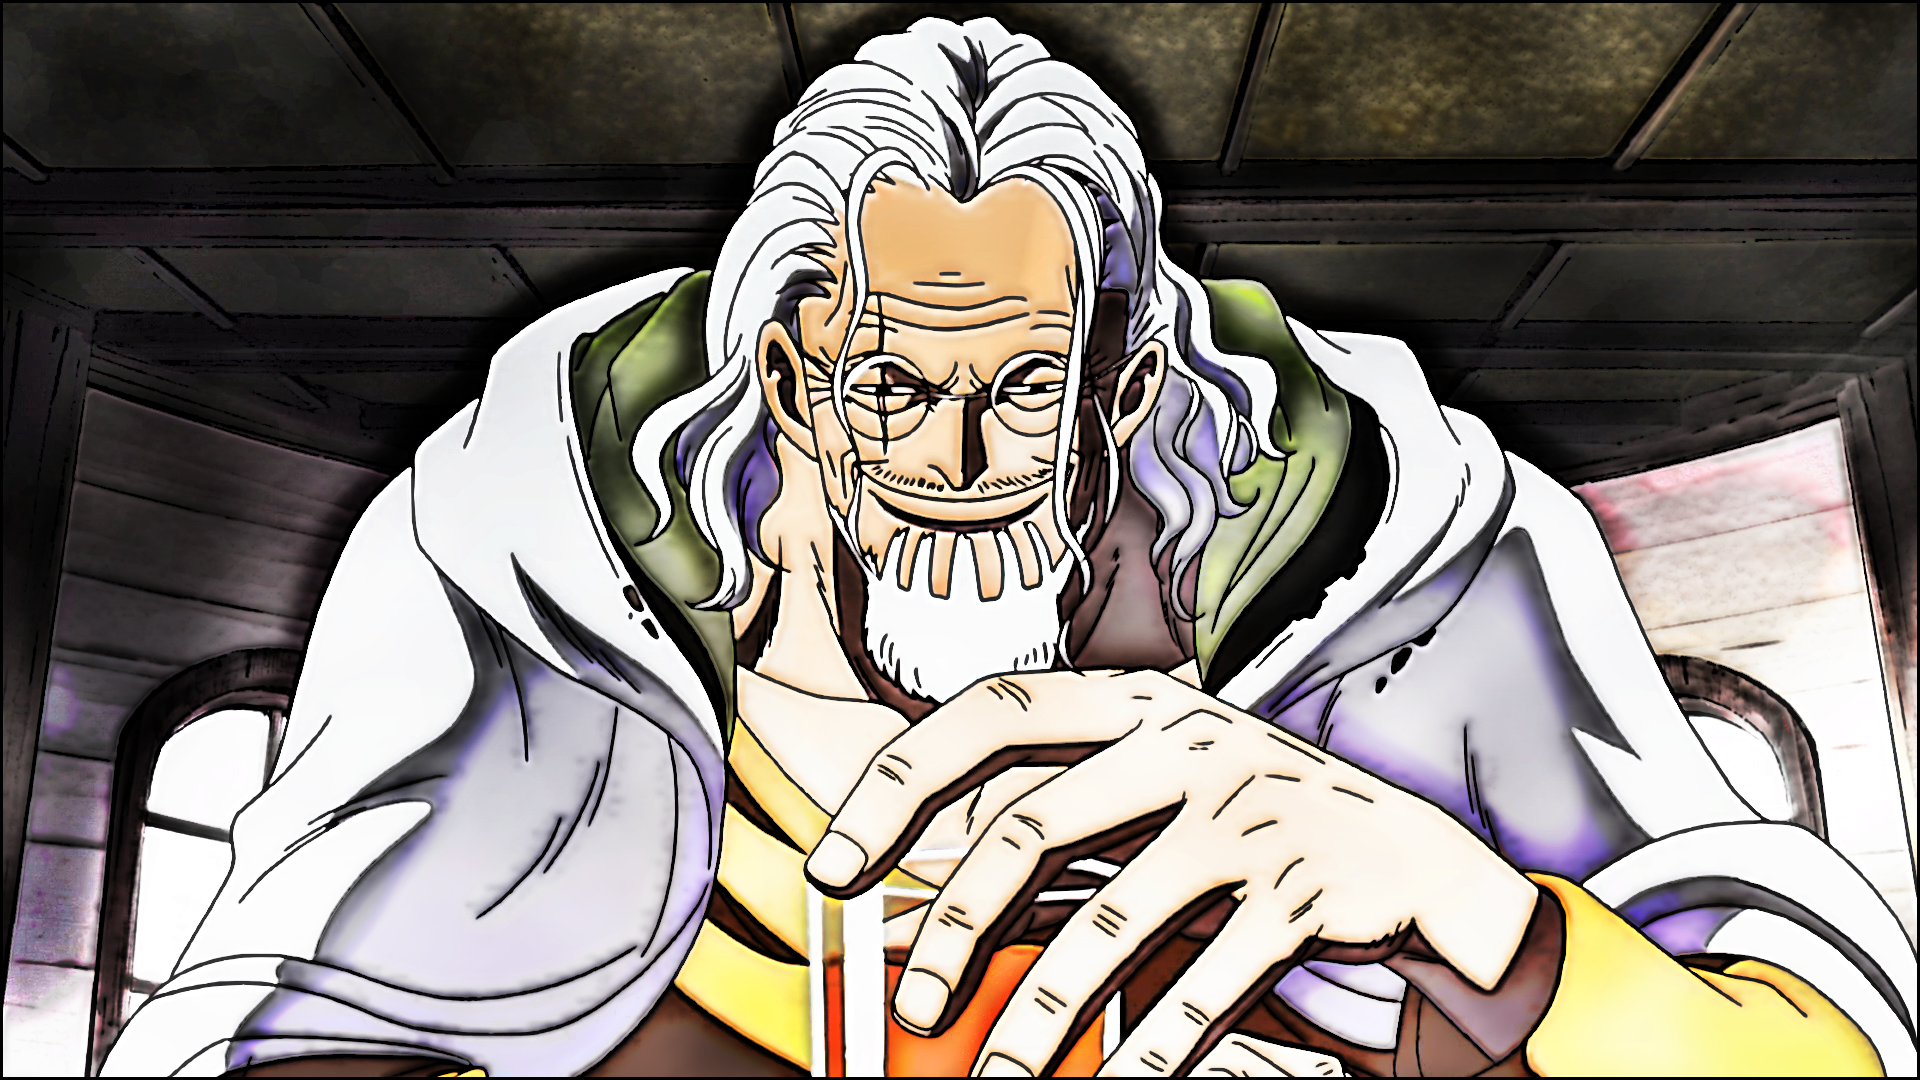 Anime 1920x1080 Rayleigh (One piece) anime anime men One Piece closed mouth smiling drinking glass drink scars sitting beard glasses white hair